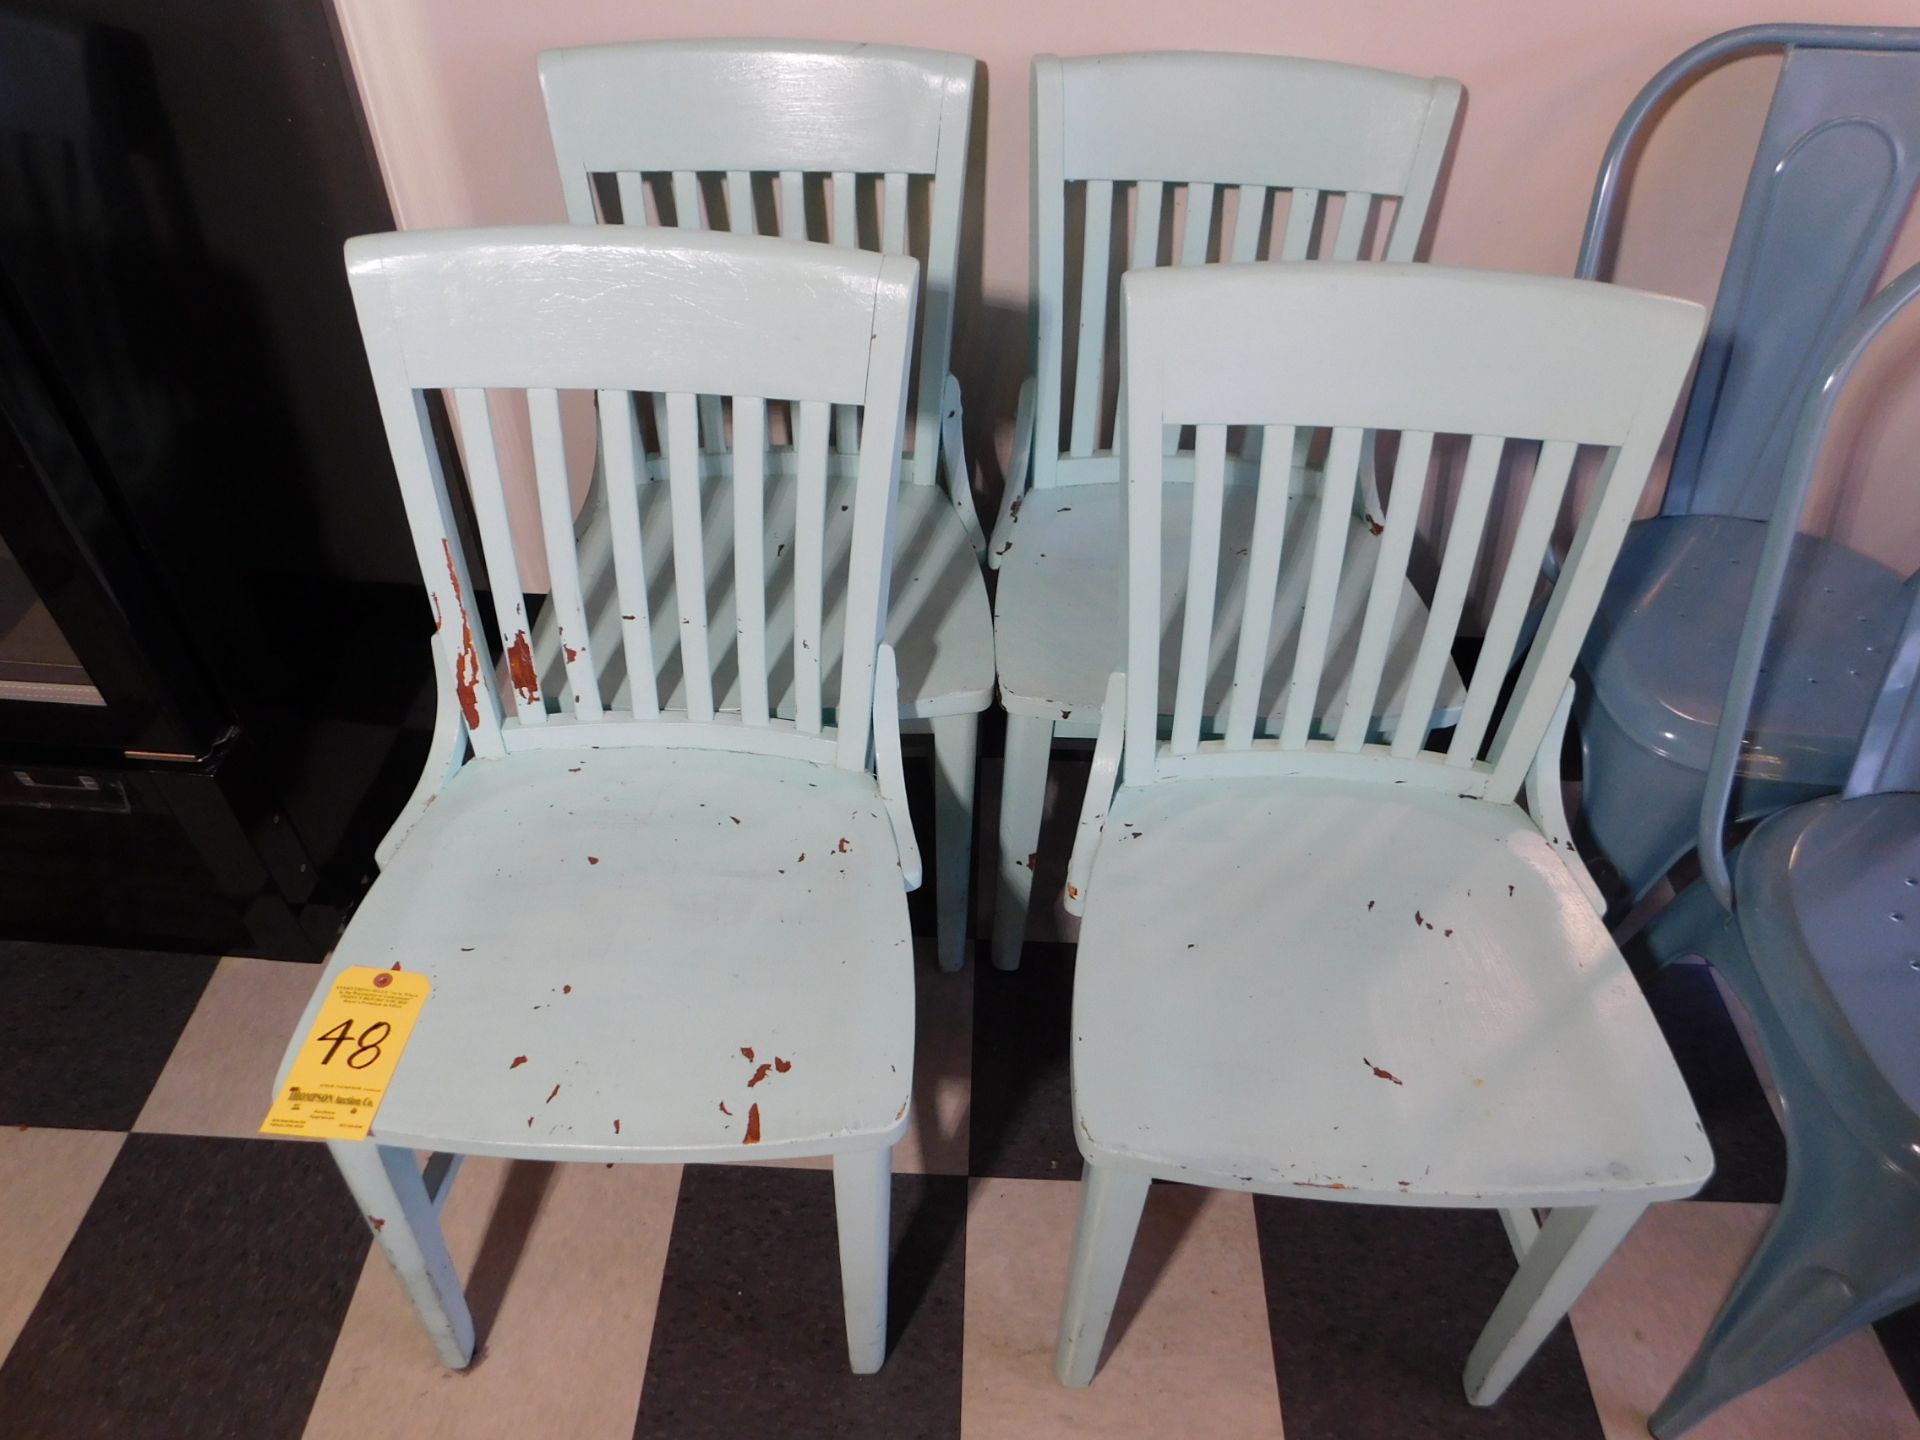 (4) Teal Wooden Chairs